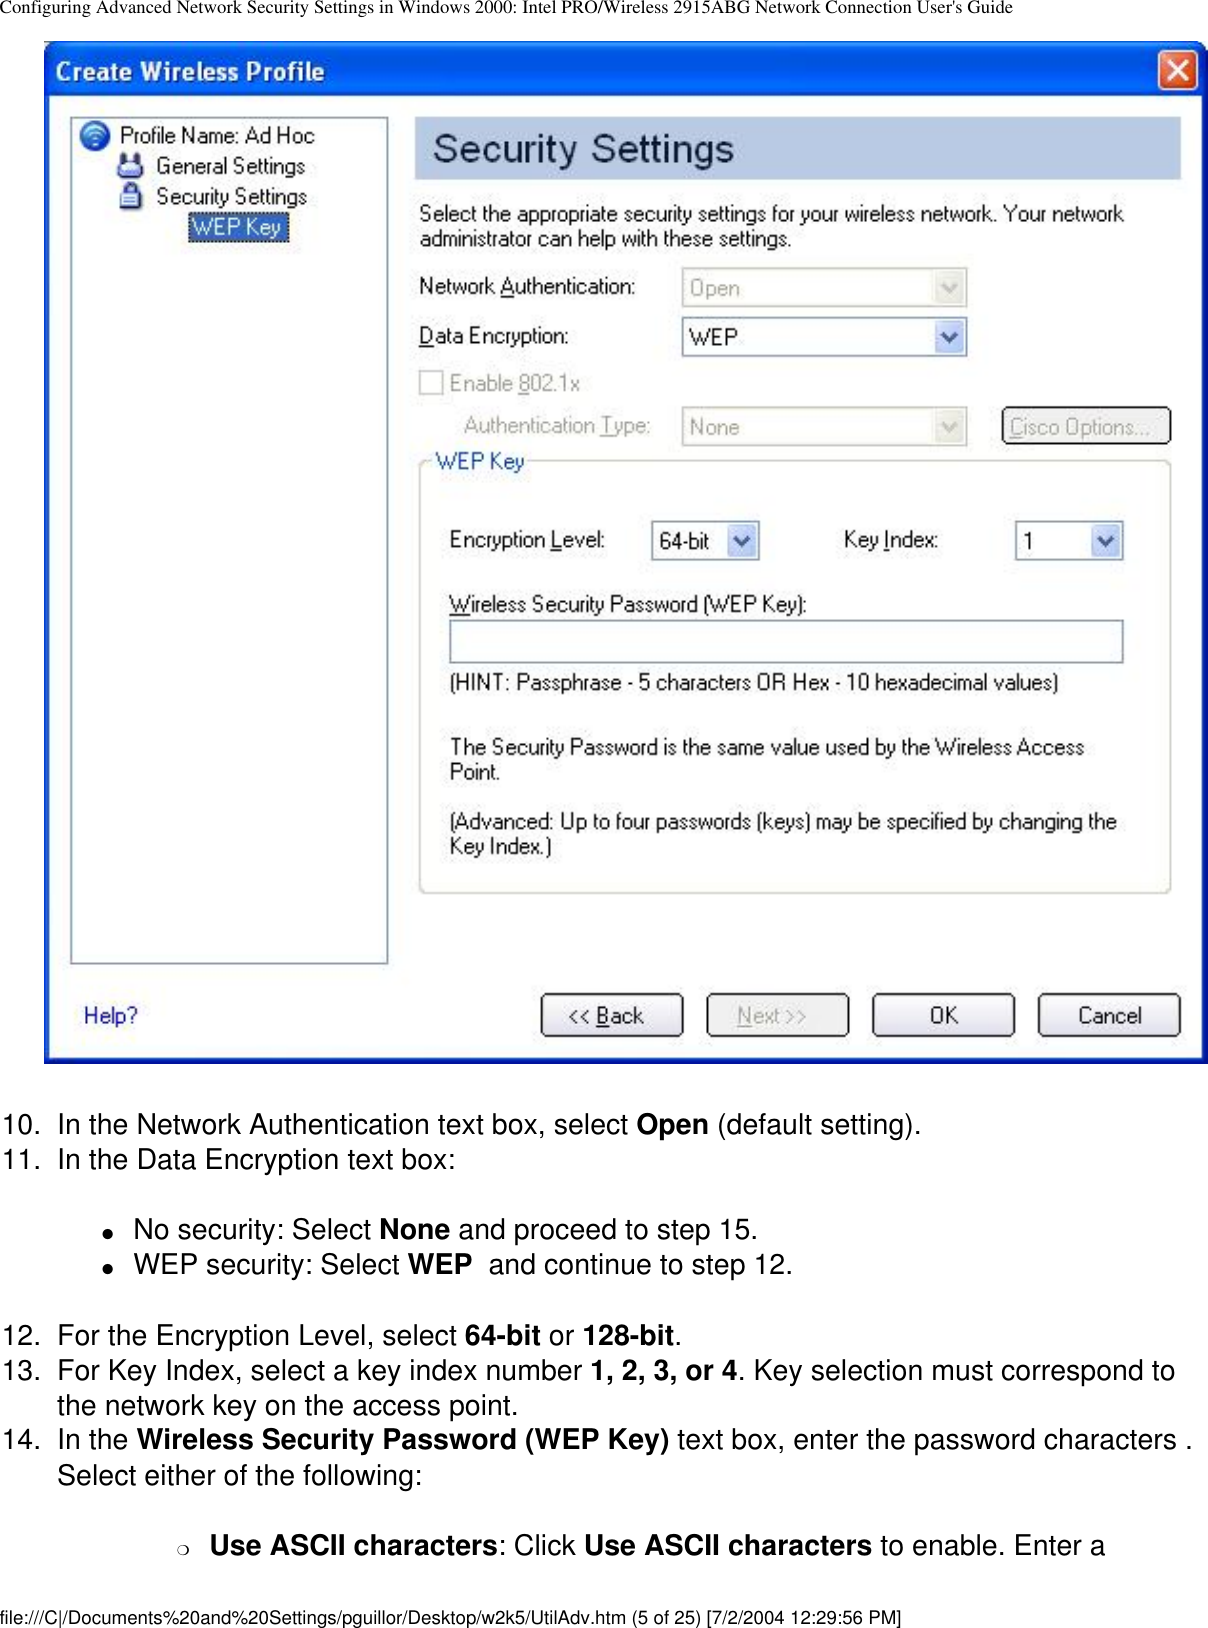 Configuring Advanced Network Security Settings in Windows 2000: Intel PRO/Wireless 2915ABG Network Connection User&apos;s Guide        10.  In the Network Authentication text box, select Open (default setting).11.  In the Data Encryption text box:●     No security: Select None and proceed to step 15.●     WEP security: Select WEP  and continue to step 12.12.  For the Encryption Level, select 64-bit or 128-bit. 13.  For Key Index, select a key index number 1, 2, 3, or 4. Key selection must correspond to the network key on the access point. 14.  In the Wireless Security Password (WEP Key) text box, enter the password characters . Select either of the following:❍     Use ASCII characters: Click Use ASCII characters to enable. Enter a file:///C|/Documents%20and%20Settings/pguillor/Desktop/w2k5/UtilAdv.htm (5 of 25) [7/2/2004 12:29:56 PM]